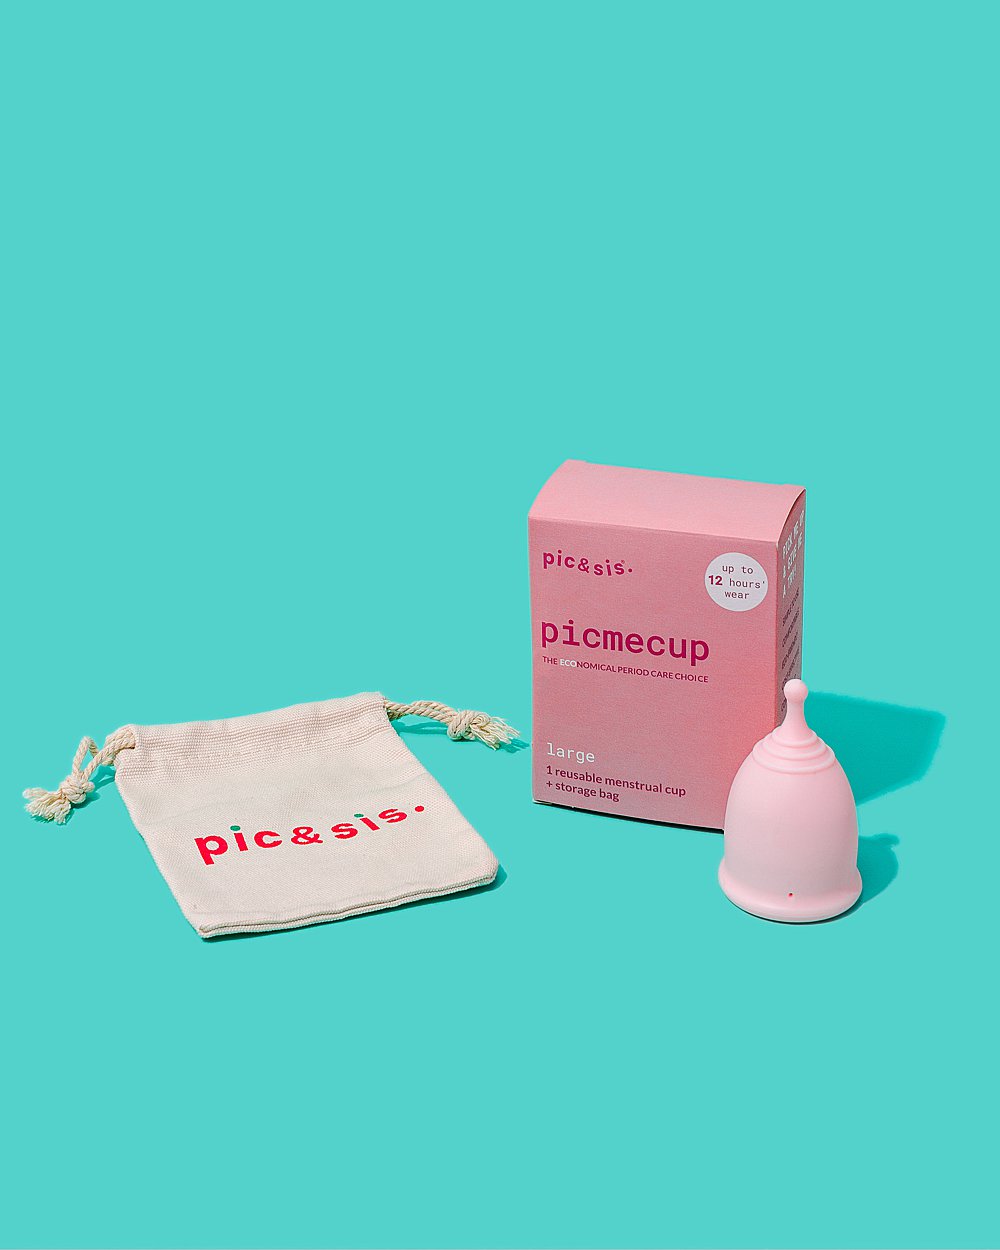 Brightly coloured feminine health product content creation for Pic & Sis menstrual cups. Styled product stills photography by Marianne Taylor.